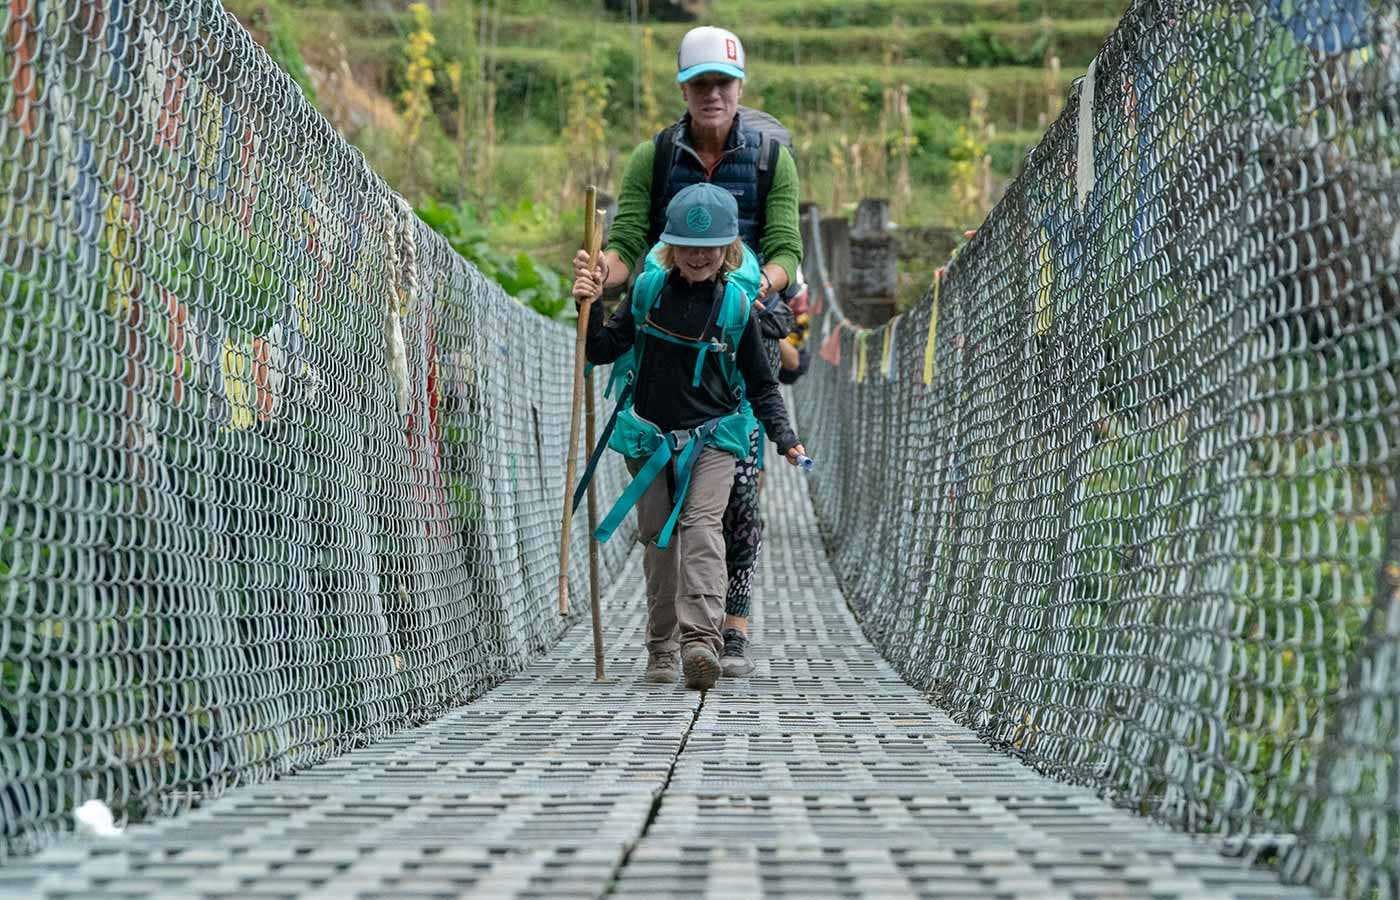 Mom and son crossing bridge in Nepal